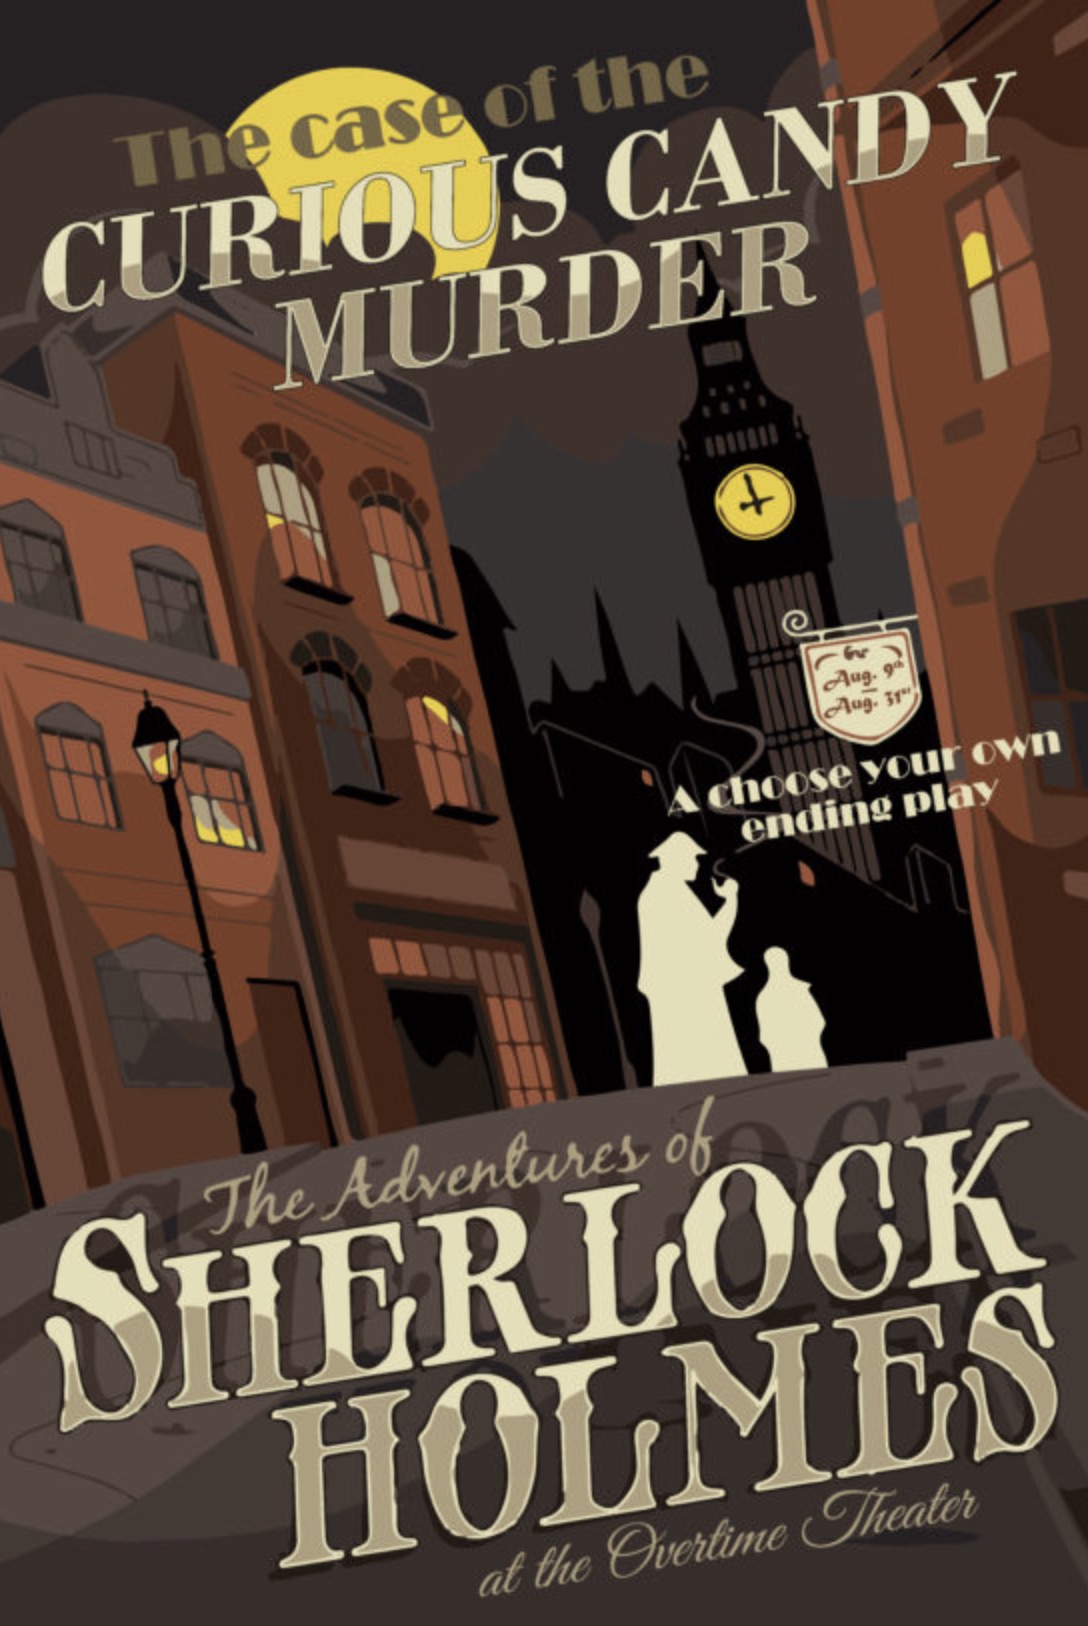 Sherlock Holmes and the Curious Candy Murder by Overtime Theater